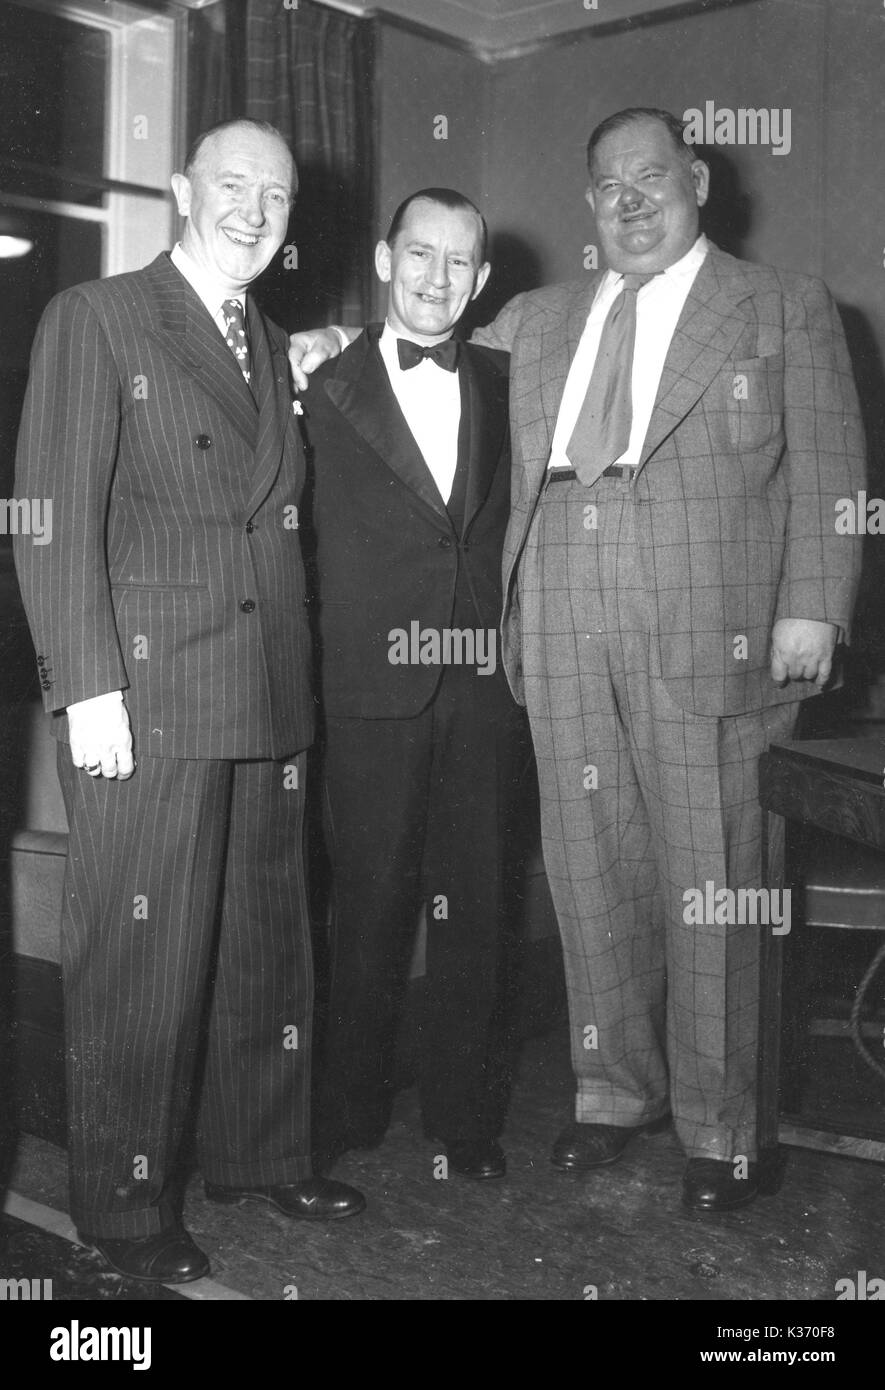 STAN LAUREL AND OLIVER HARDY EARLY 1950s Stock Photo